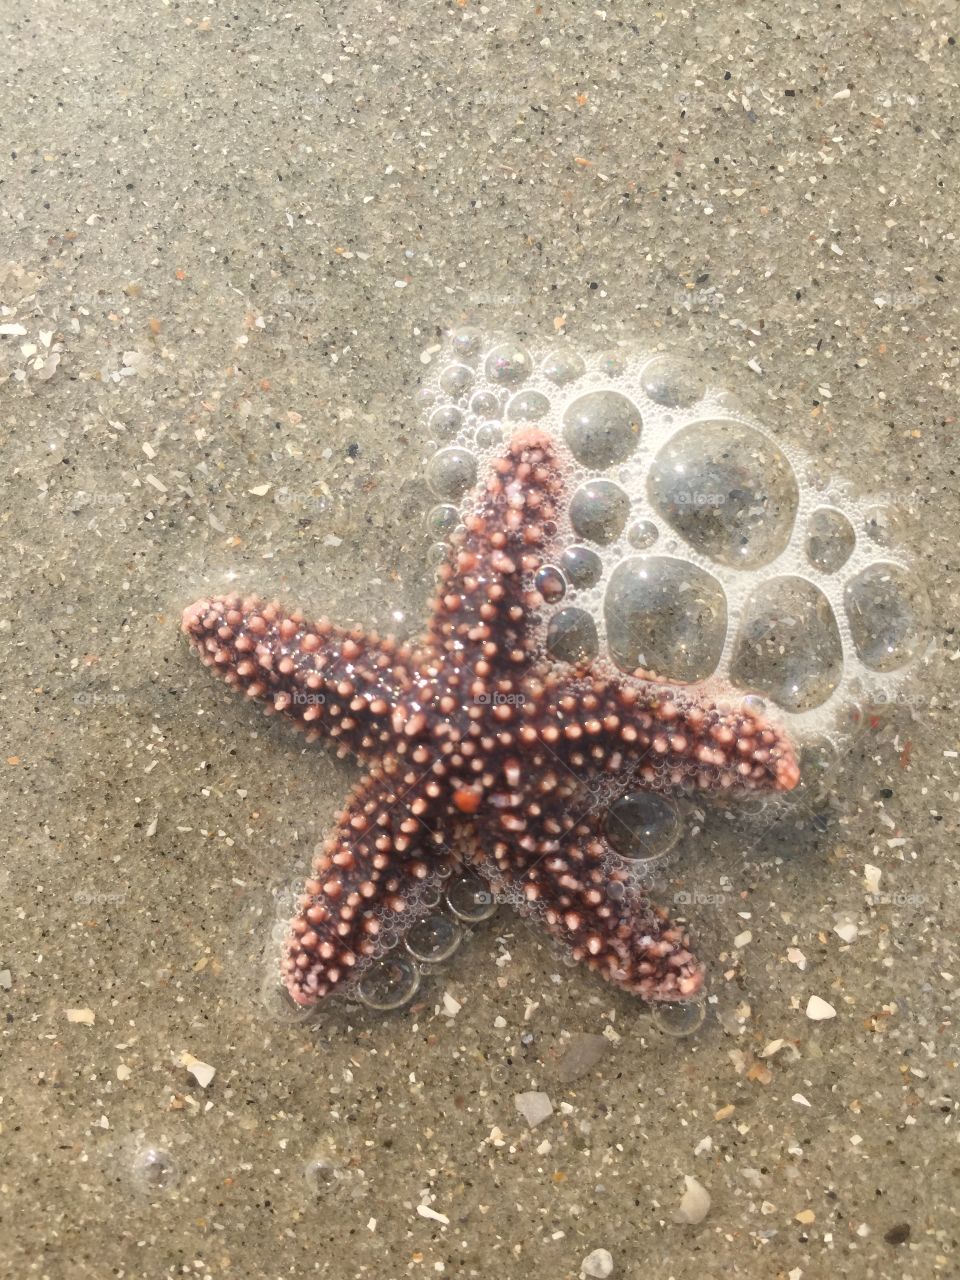 A starfish found in the surf. 